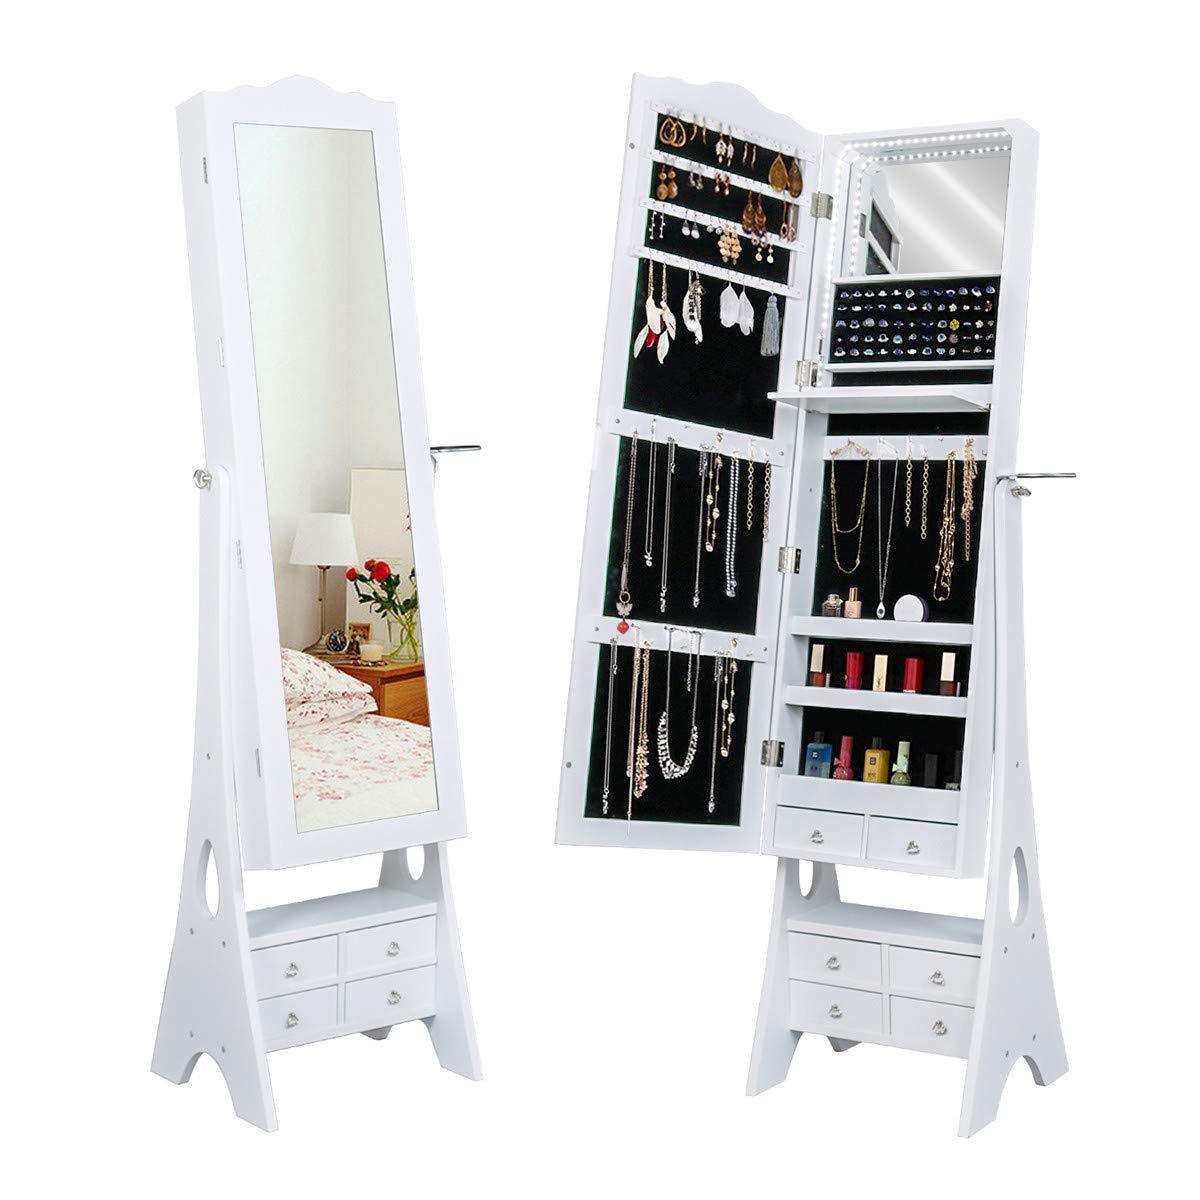 Budget friendly yokstore jewelry cabinet organizer led mirrored jewelry storage armoire with full length standing large capacity makeup dressing mirror wardrobe for bedroom white